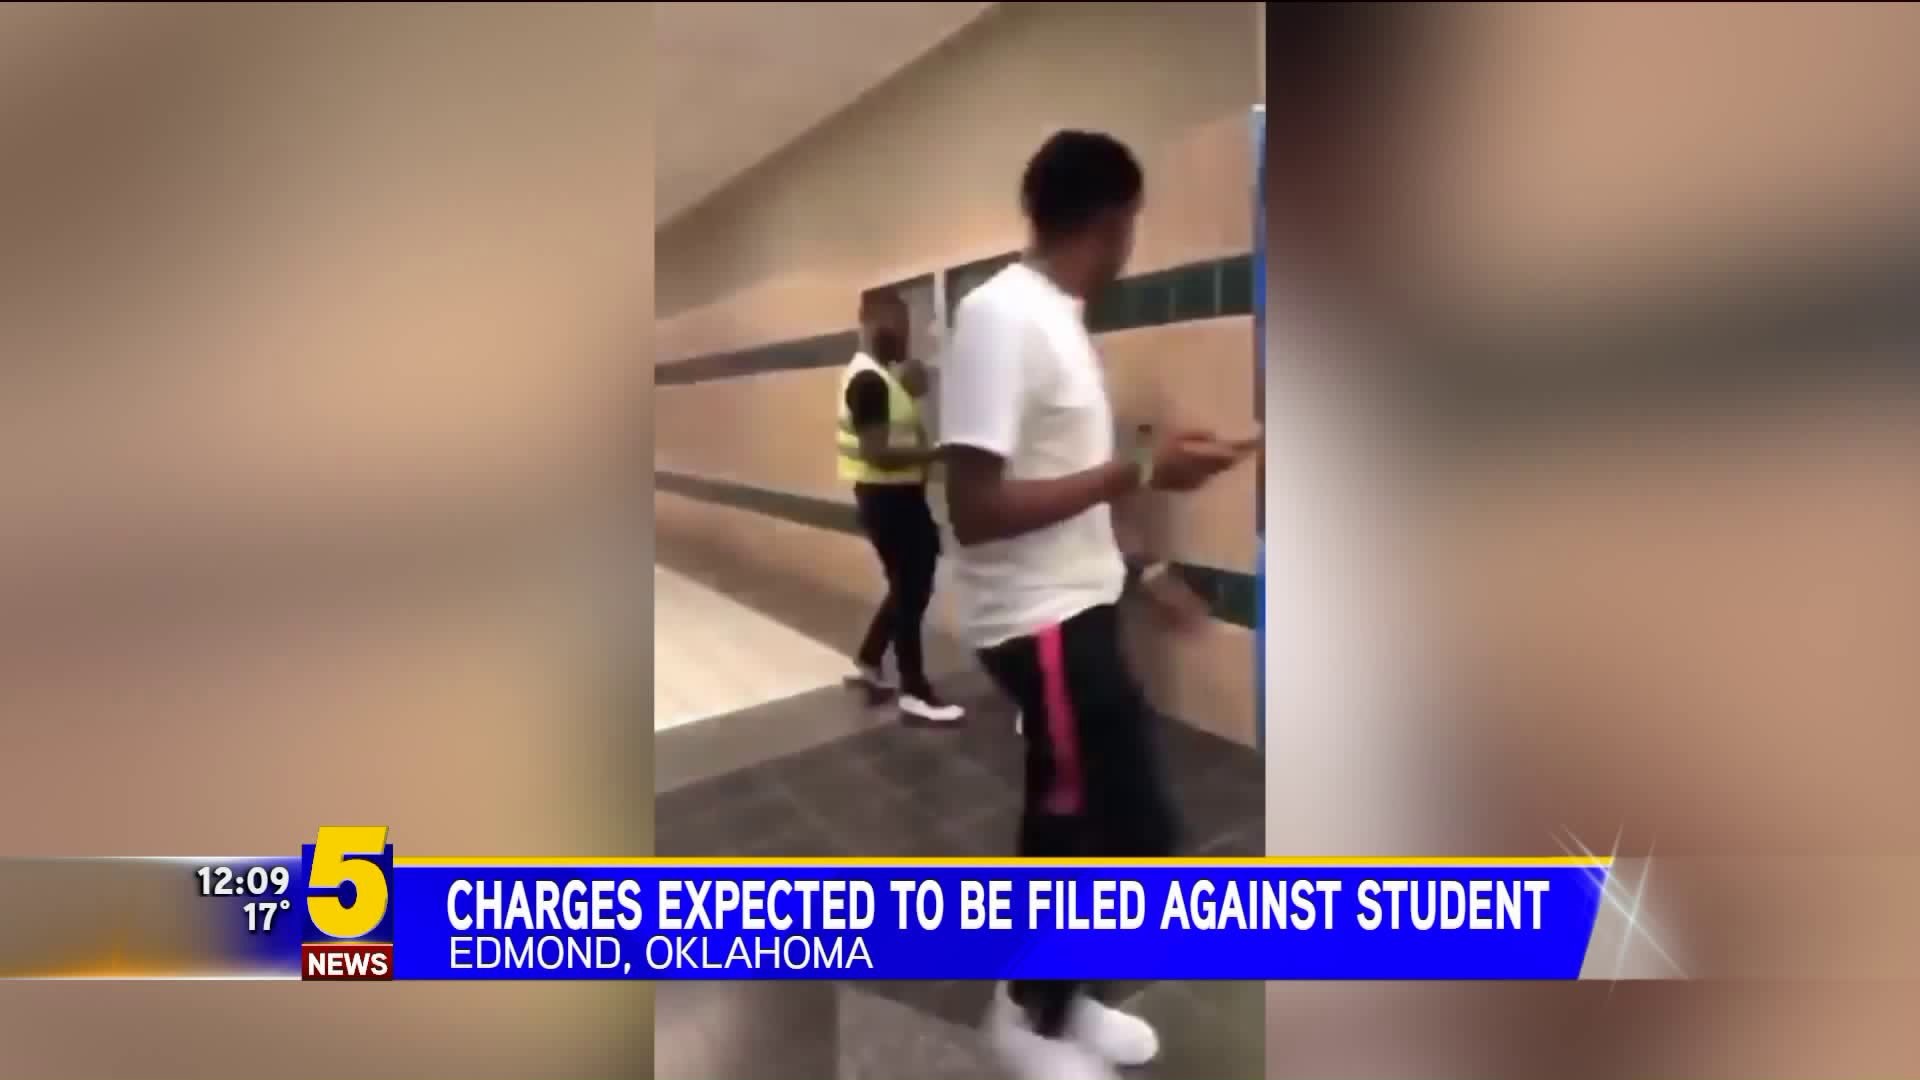 Charges Expected To Be Filed Against Student In OK